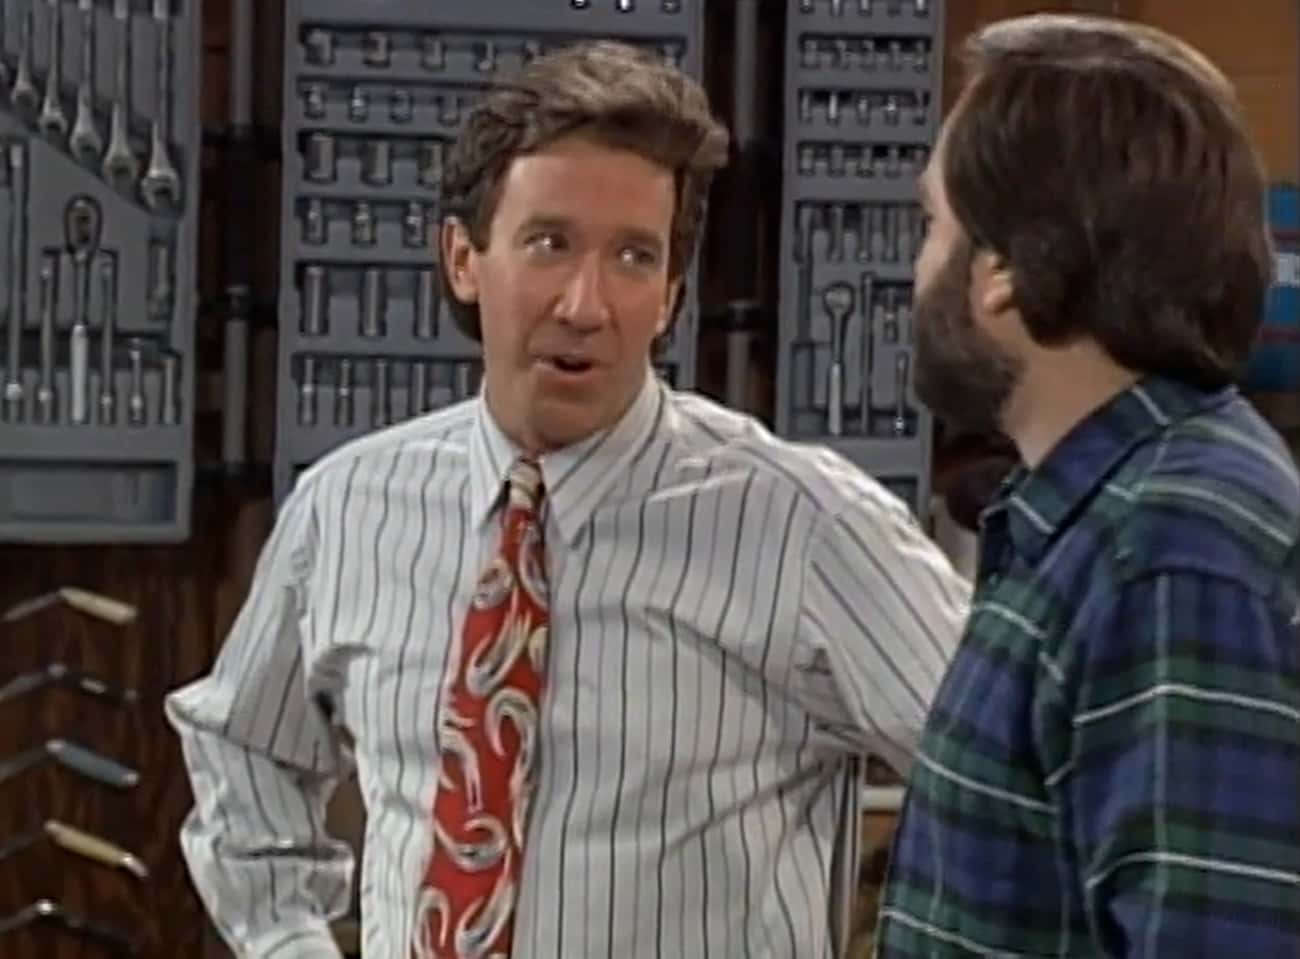 Tim Allen Went Public About His Arrest History Before The First ‘Home Improvement’ Aired So A Scandal Wouldn’t Derail The Show